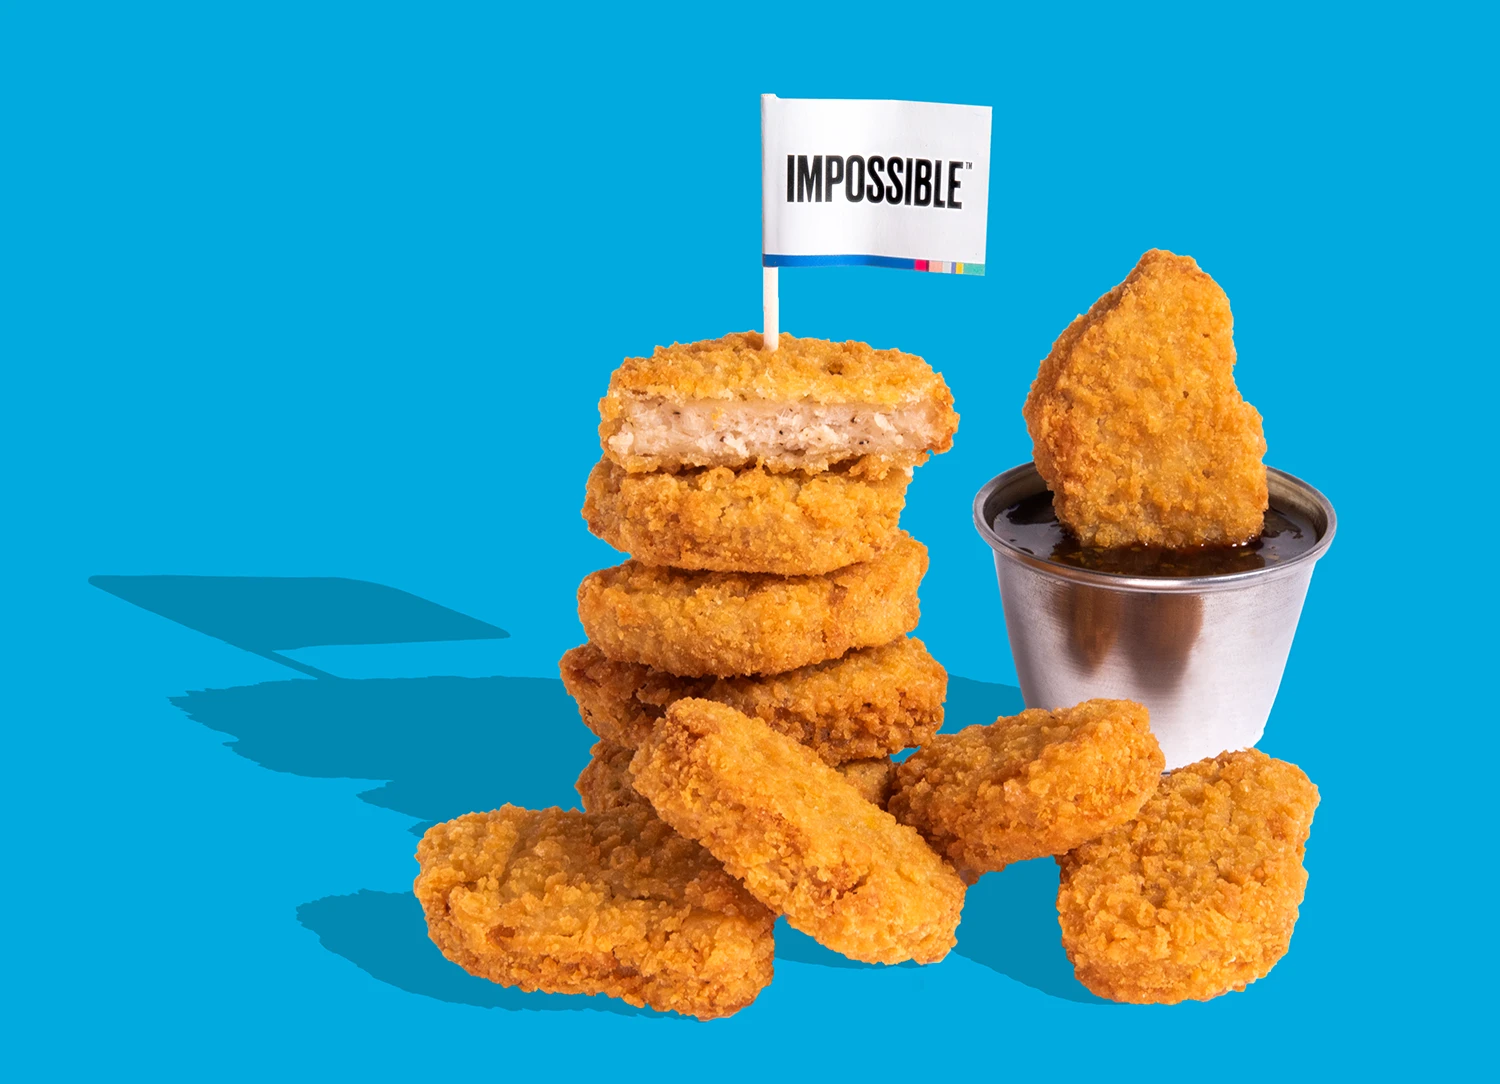 ImpossibleTM Chicken Nuggets Made From Plants with Sticky Sesame sauce over fries. No chickens were harmed in the making of this must-have dish! Sauce is on the side so you can smother it or dunk it with sauce - it’s your destiny!